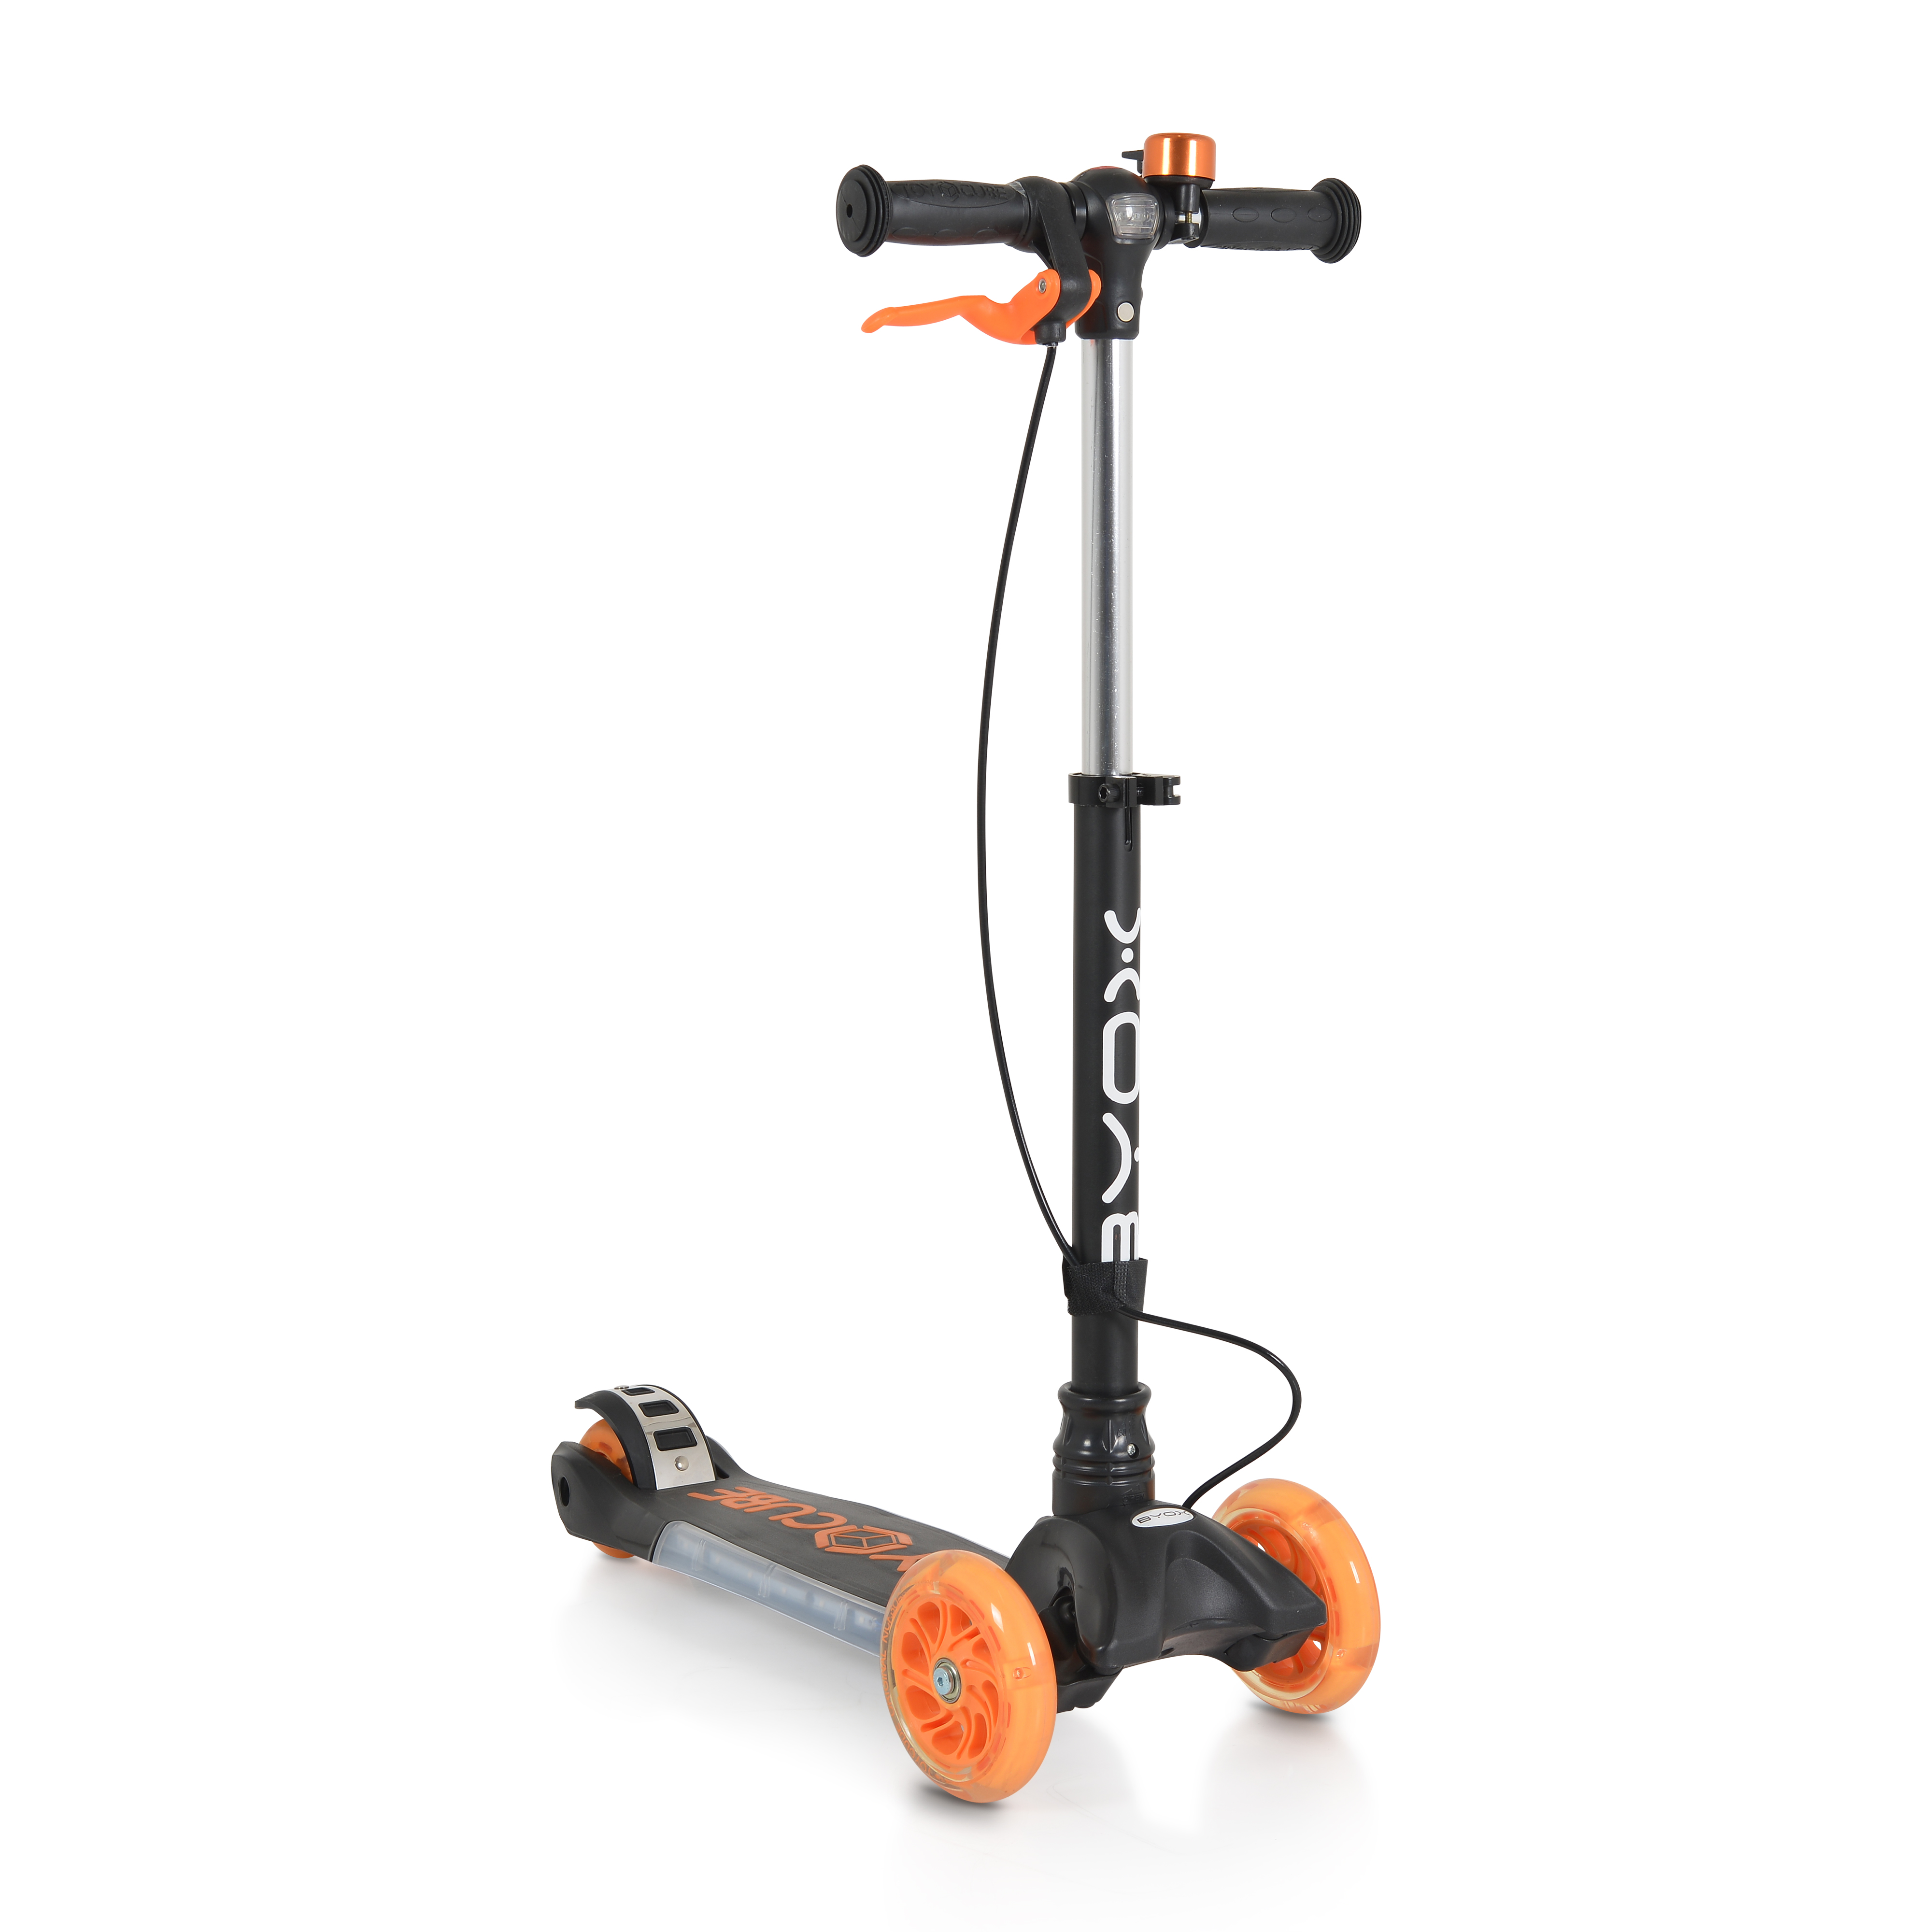 Byox Scooter Toy cube black 3800146228385